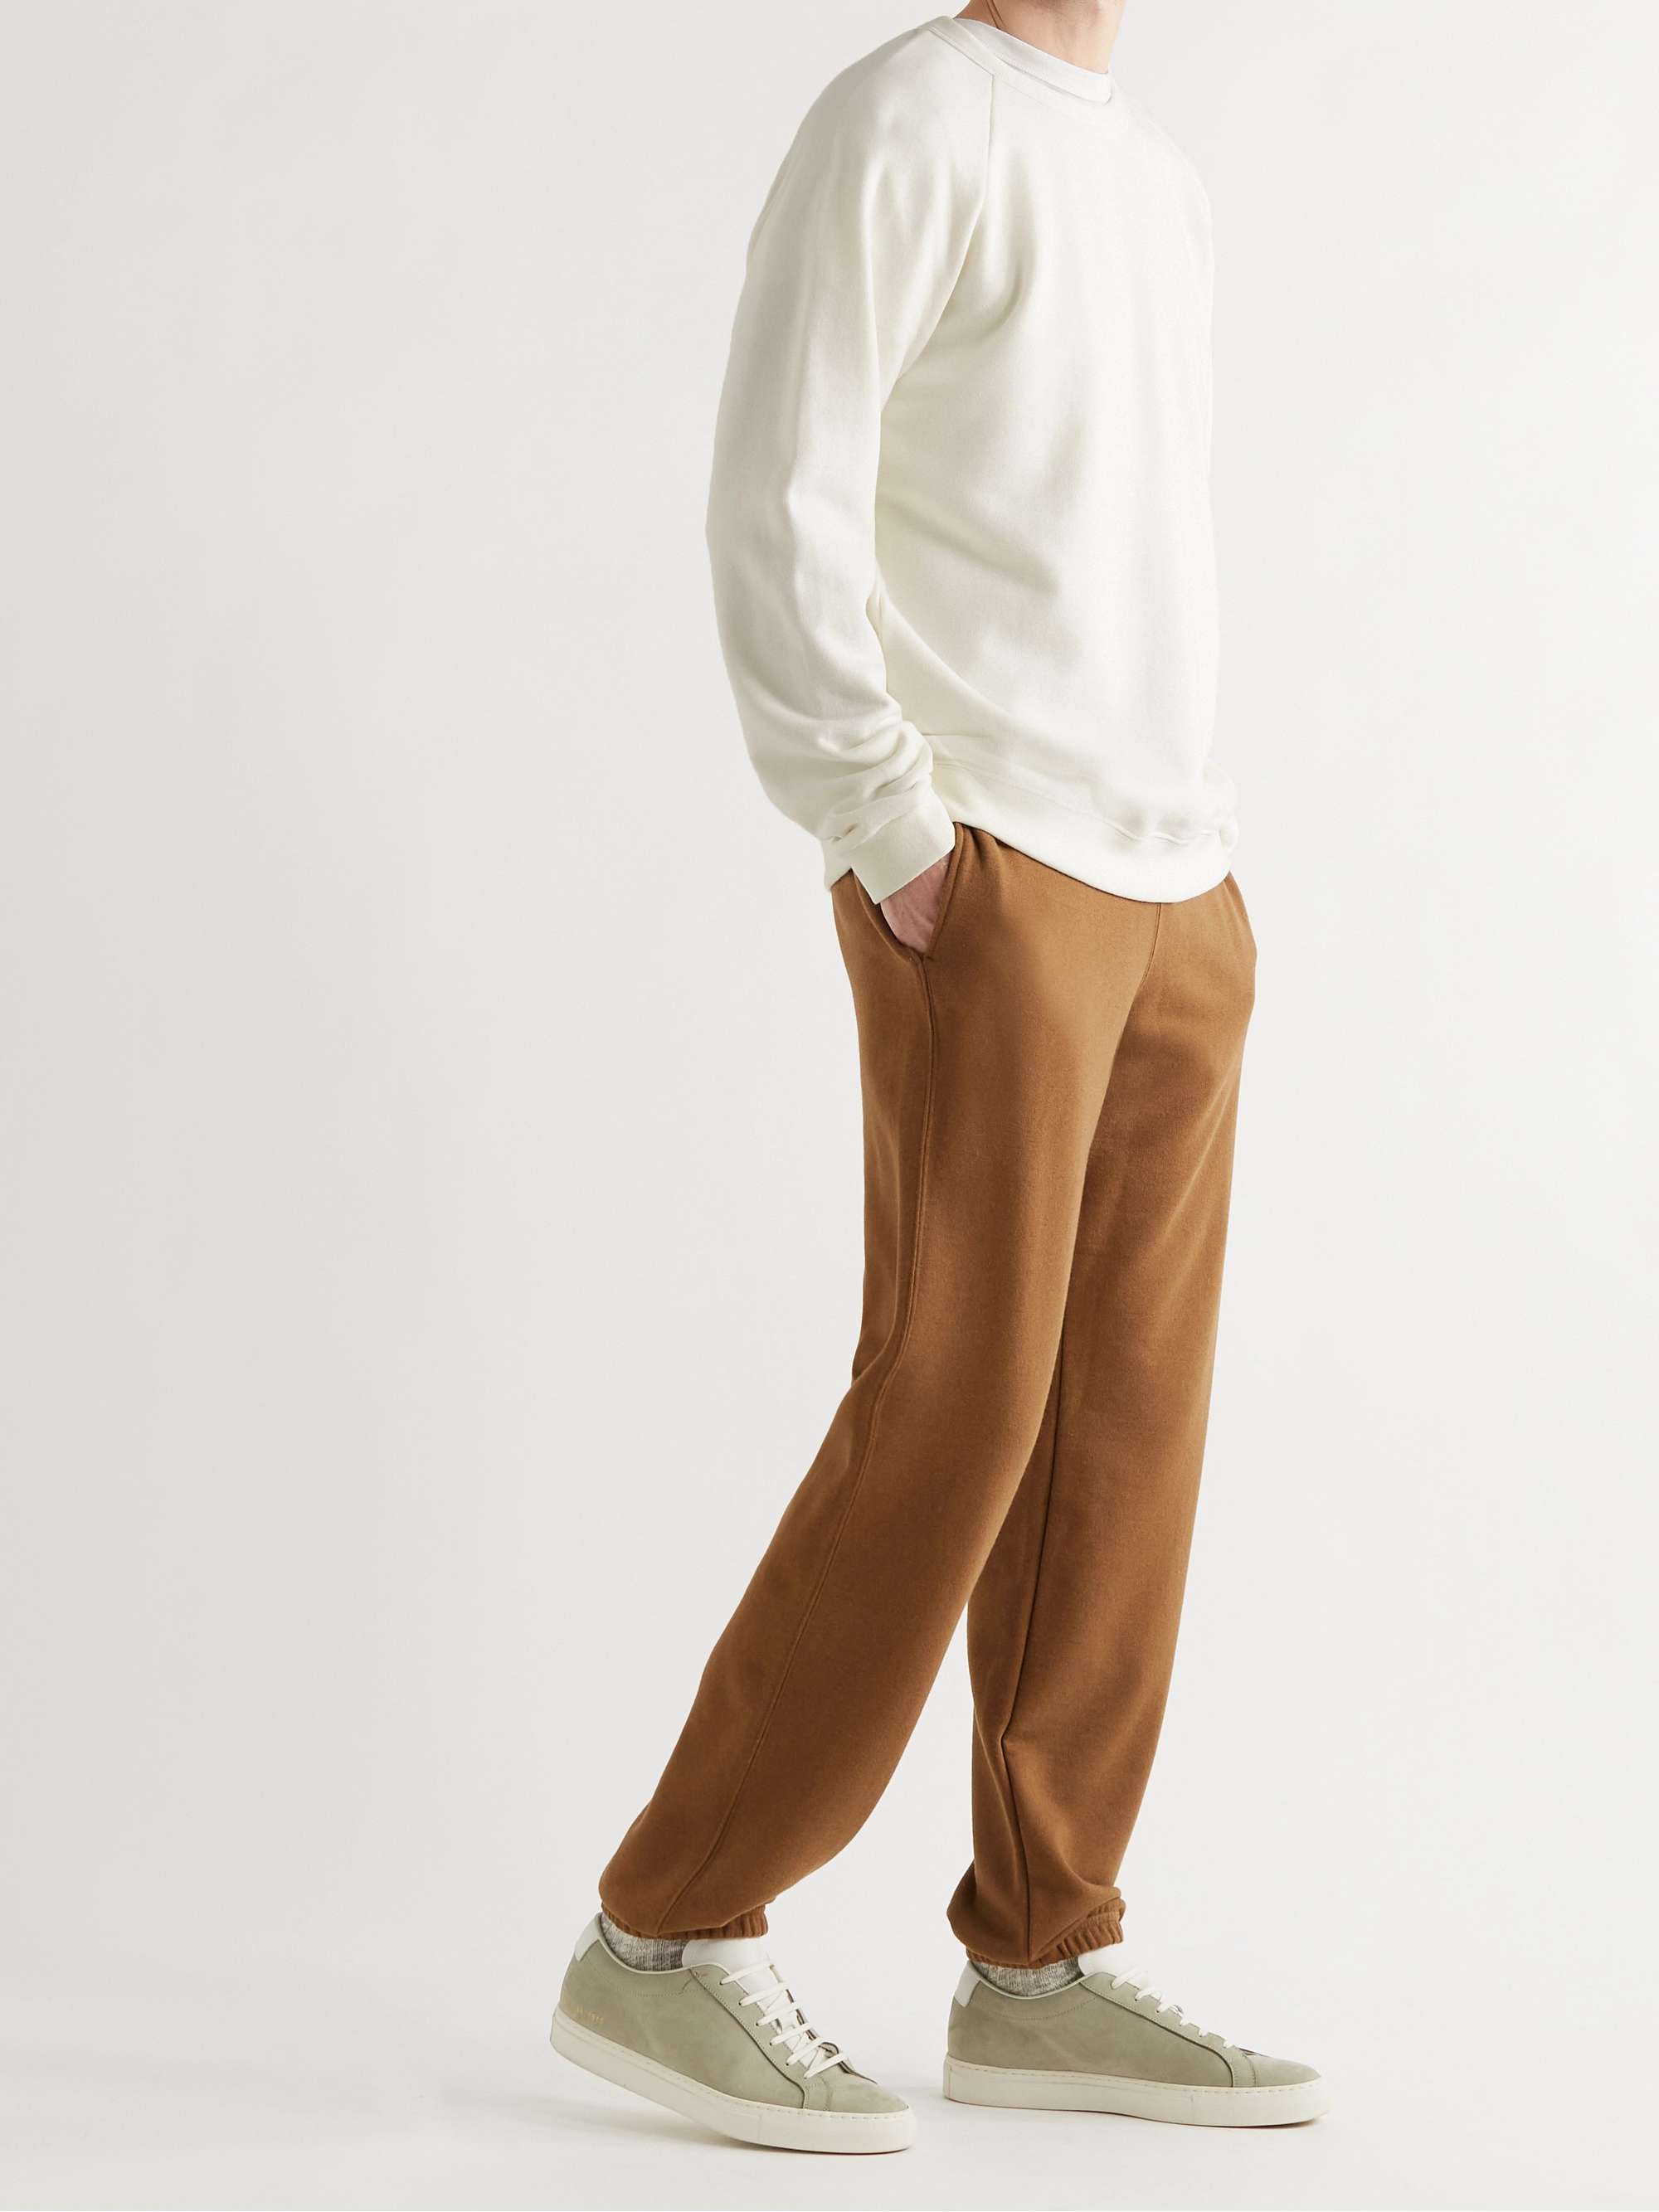 SSAM Recycled Cotton and Cashmere-Blend Jersey Sweatshirt